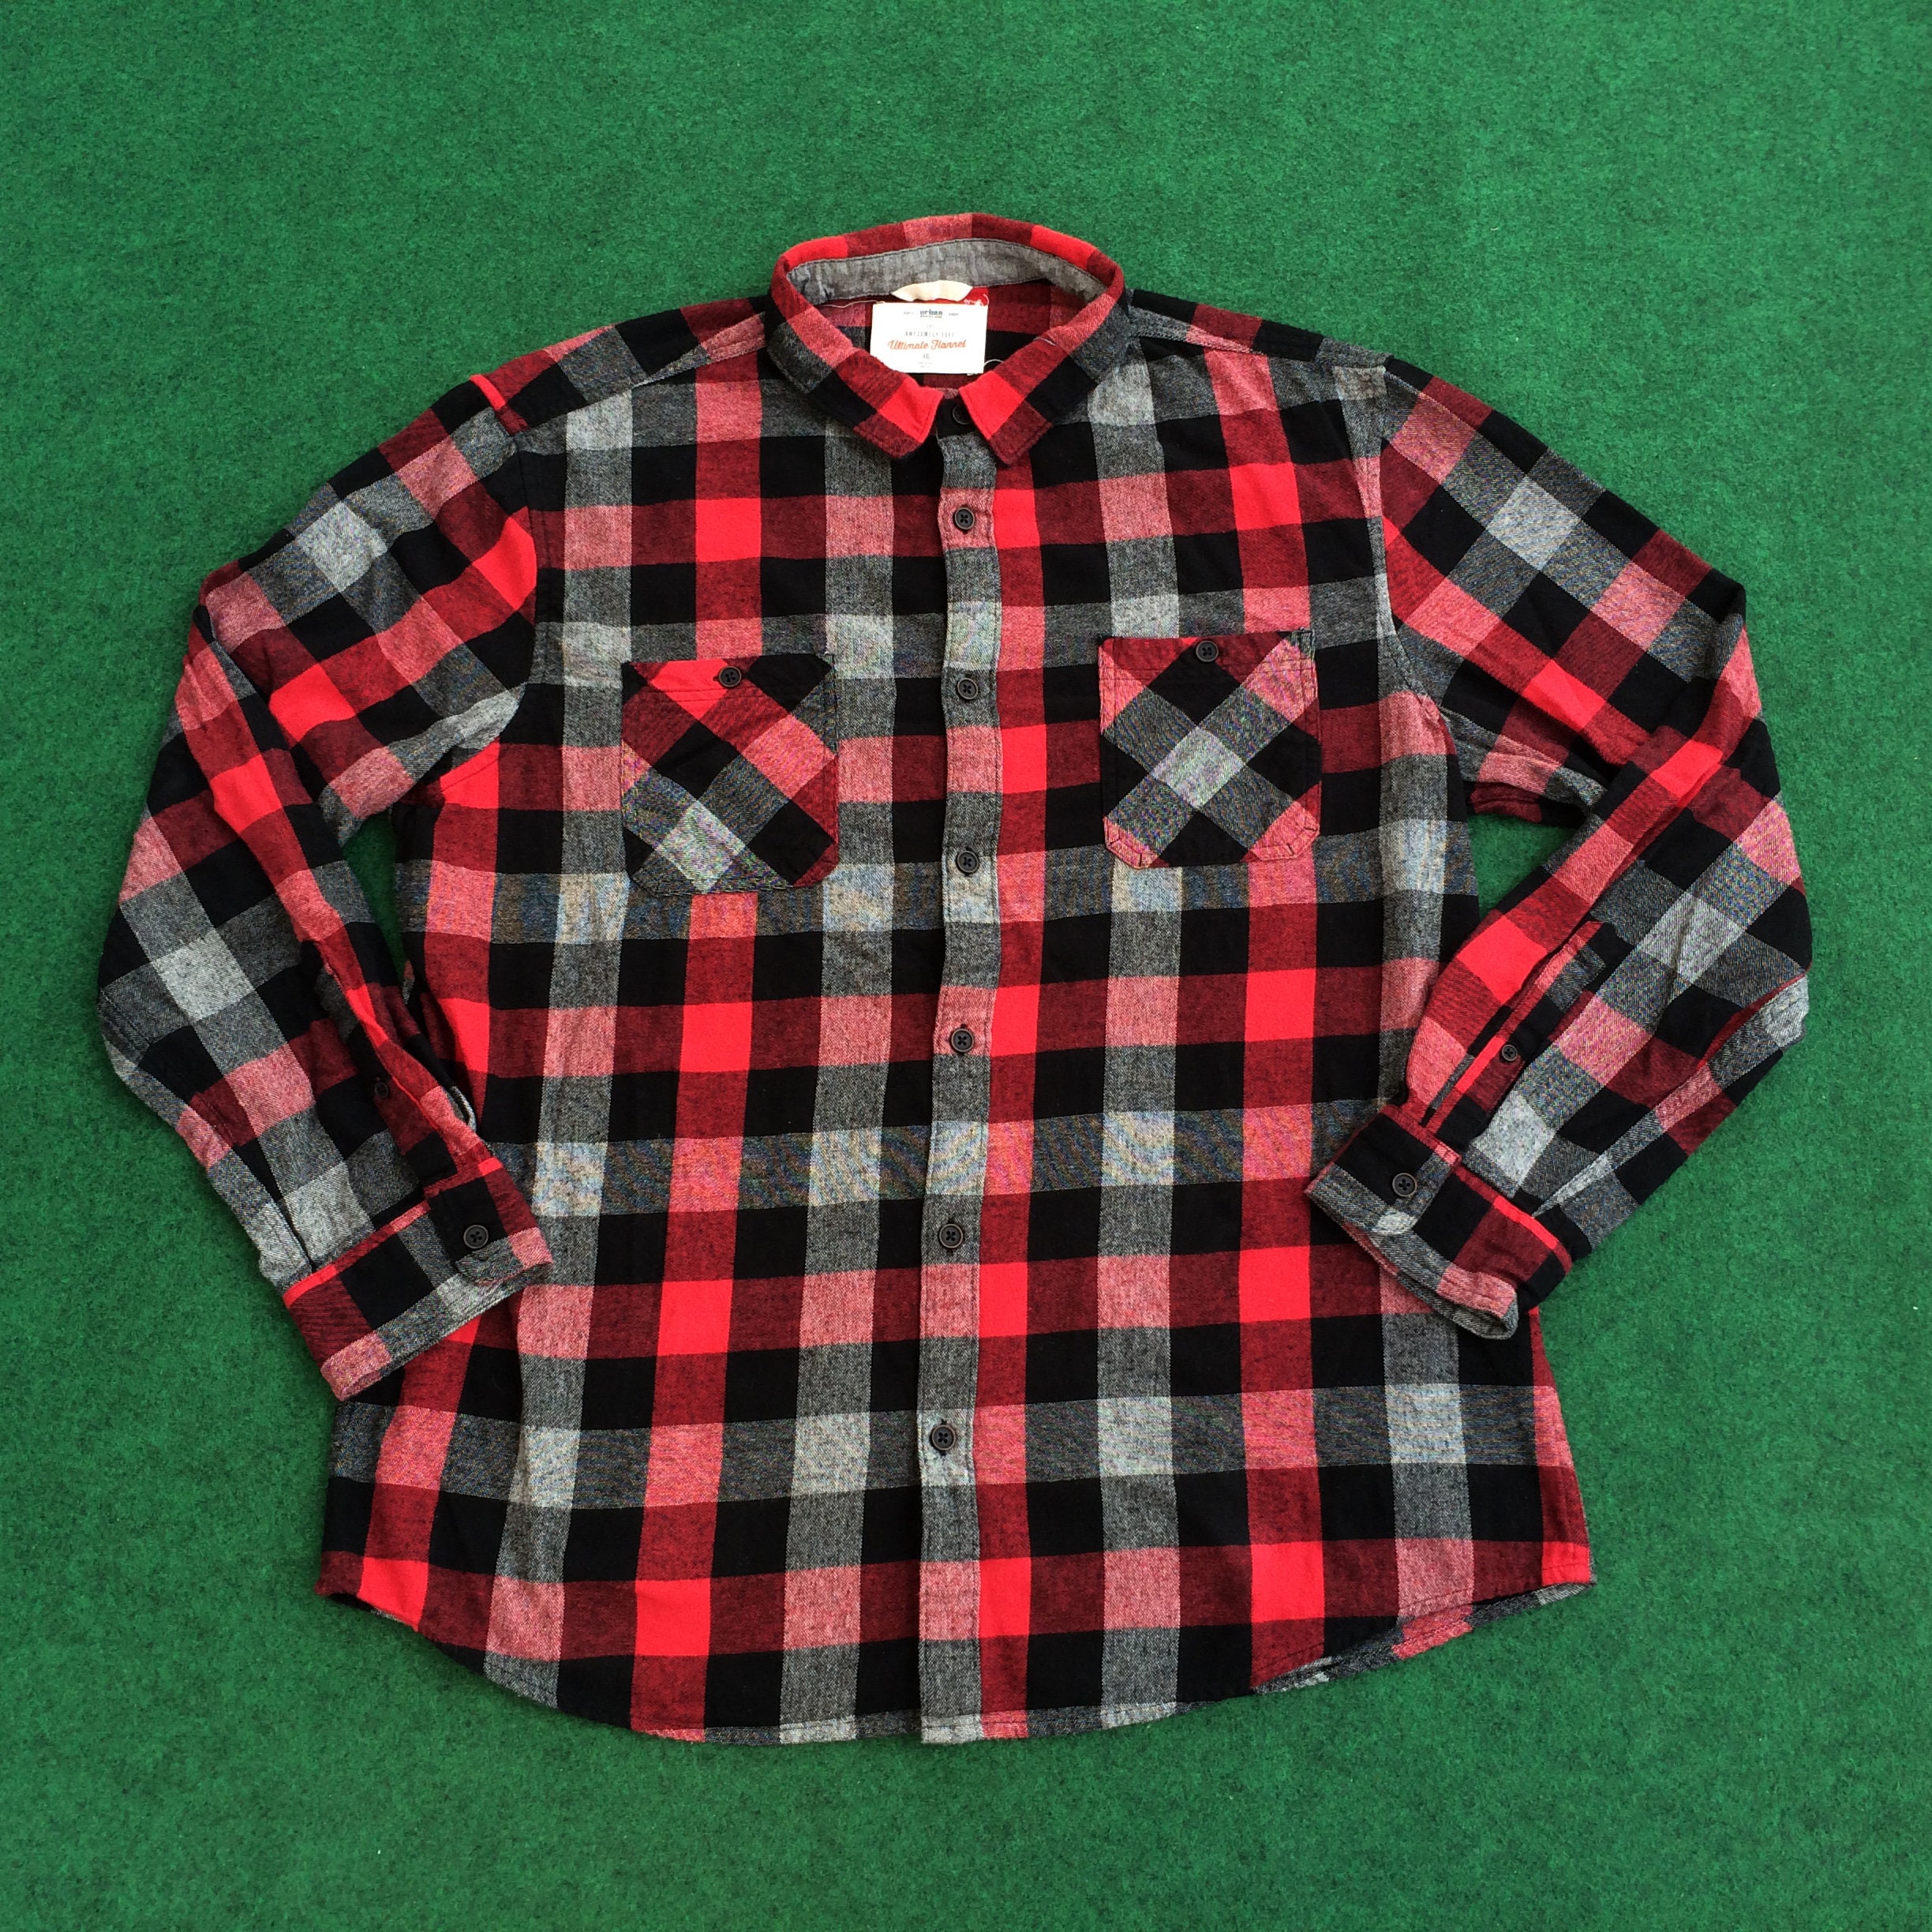 Red Flannel Pajama Shirt: Captivating Playboy Sleep Shirt in Red Plaid